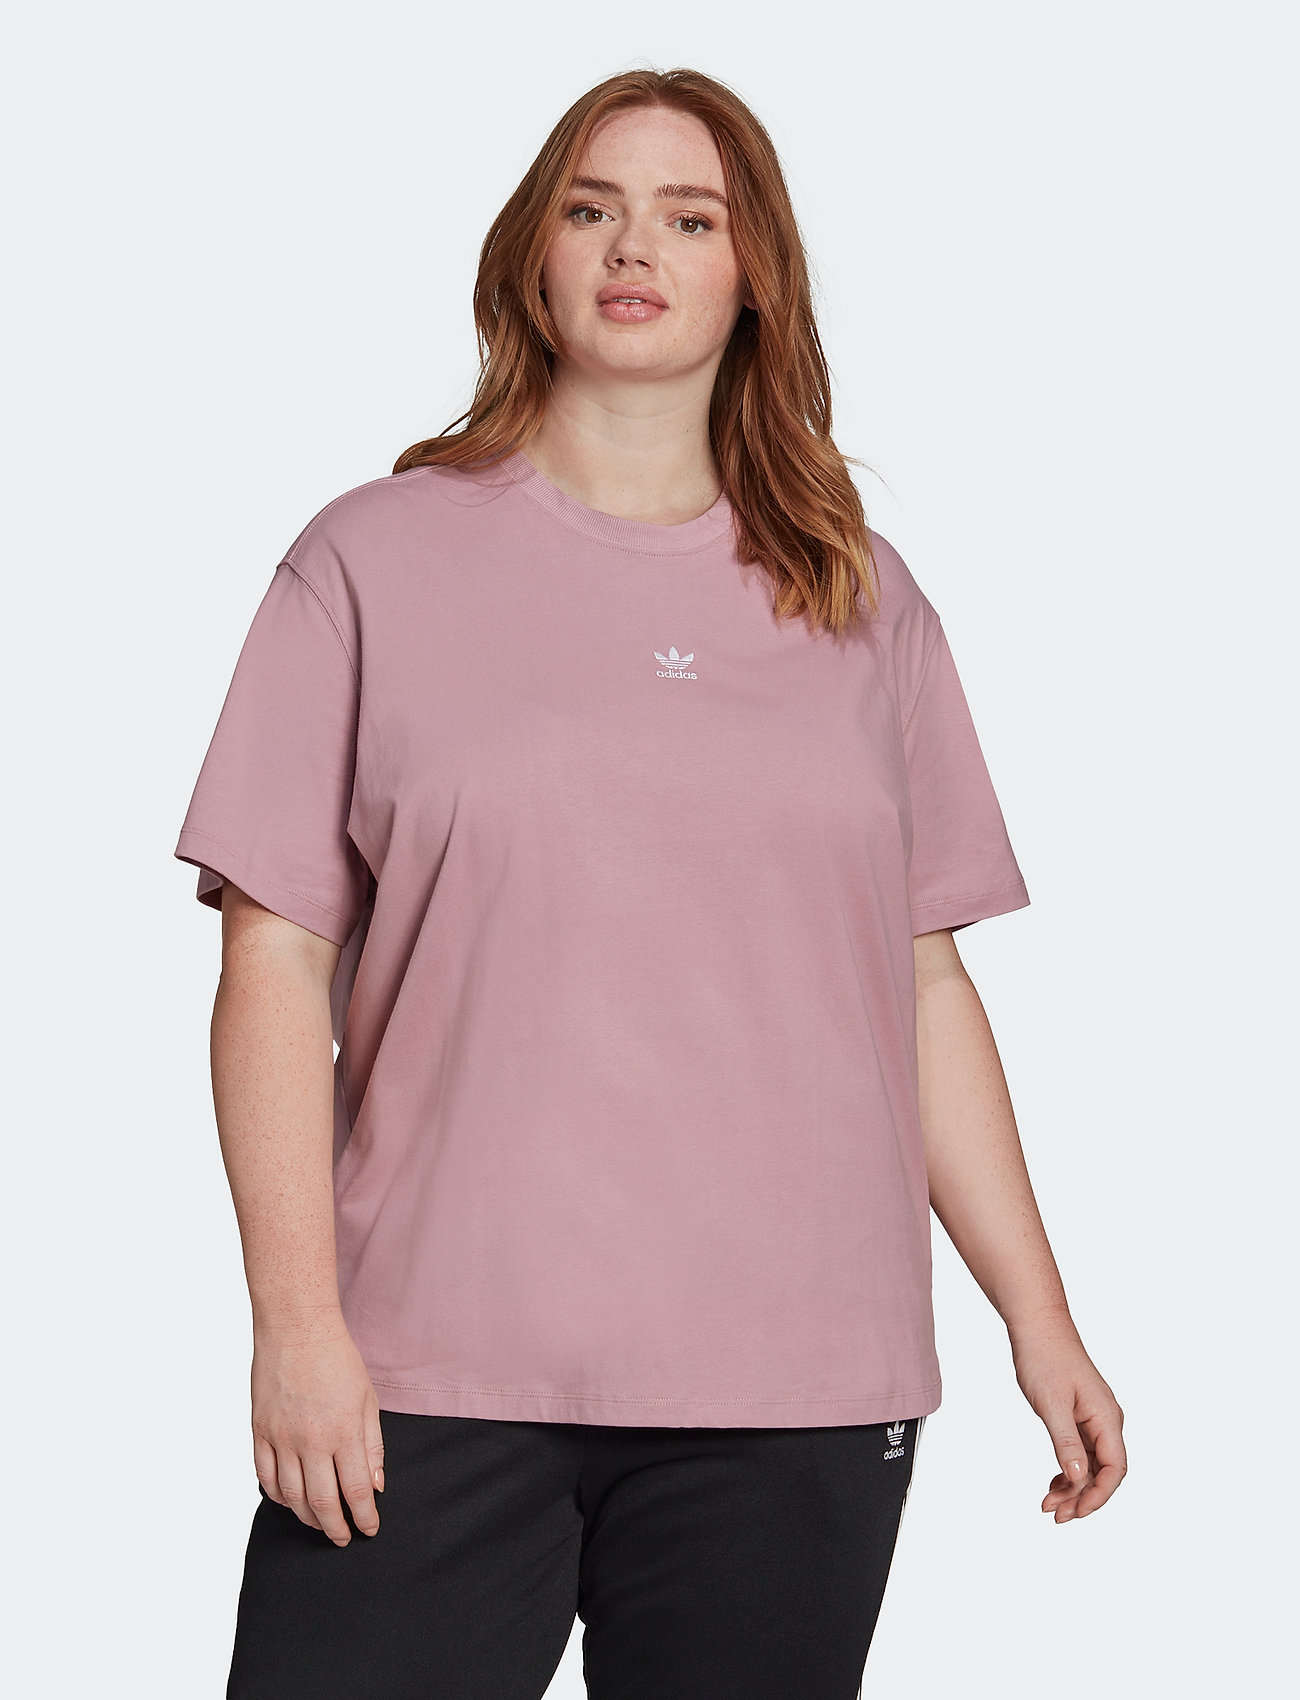 Mere Implement Periodisk adidas Originals Tee (plus Size) W - T-shirts | Boozt.com